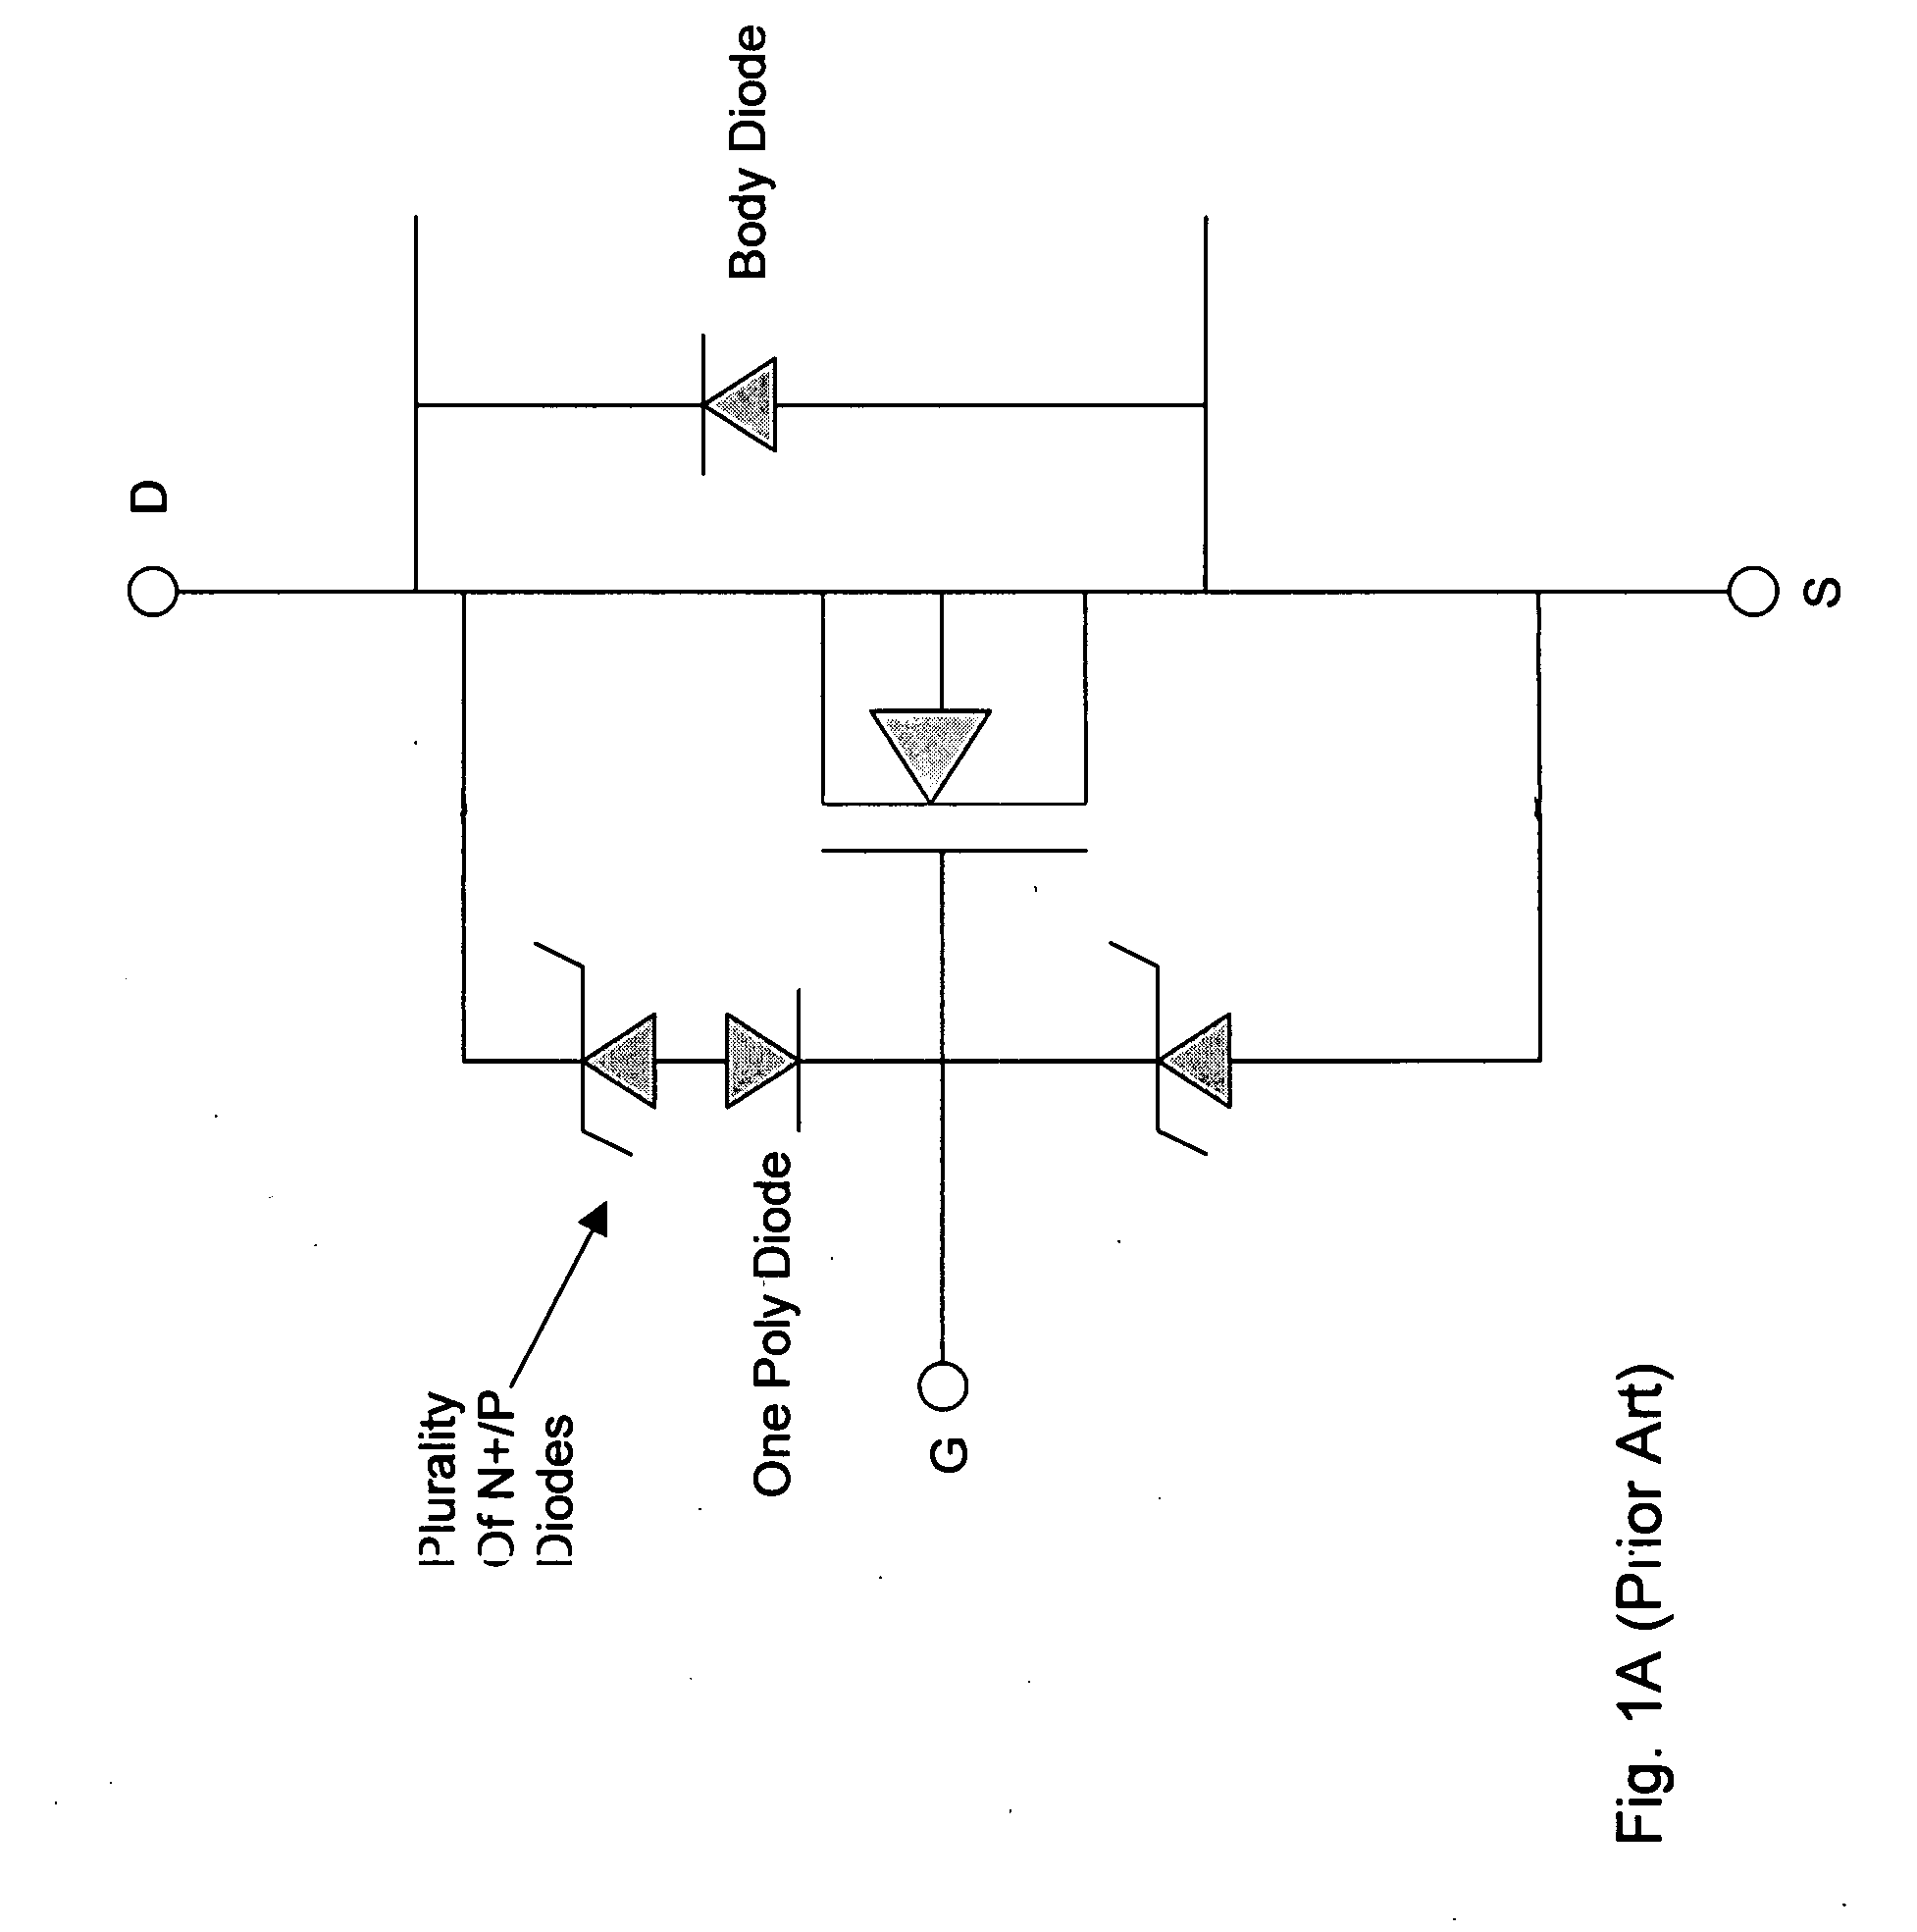 Trenched MOSFETs with improved gate-drain (GD) clamp diodes